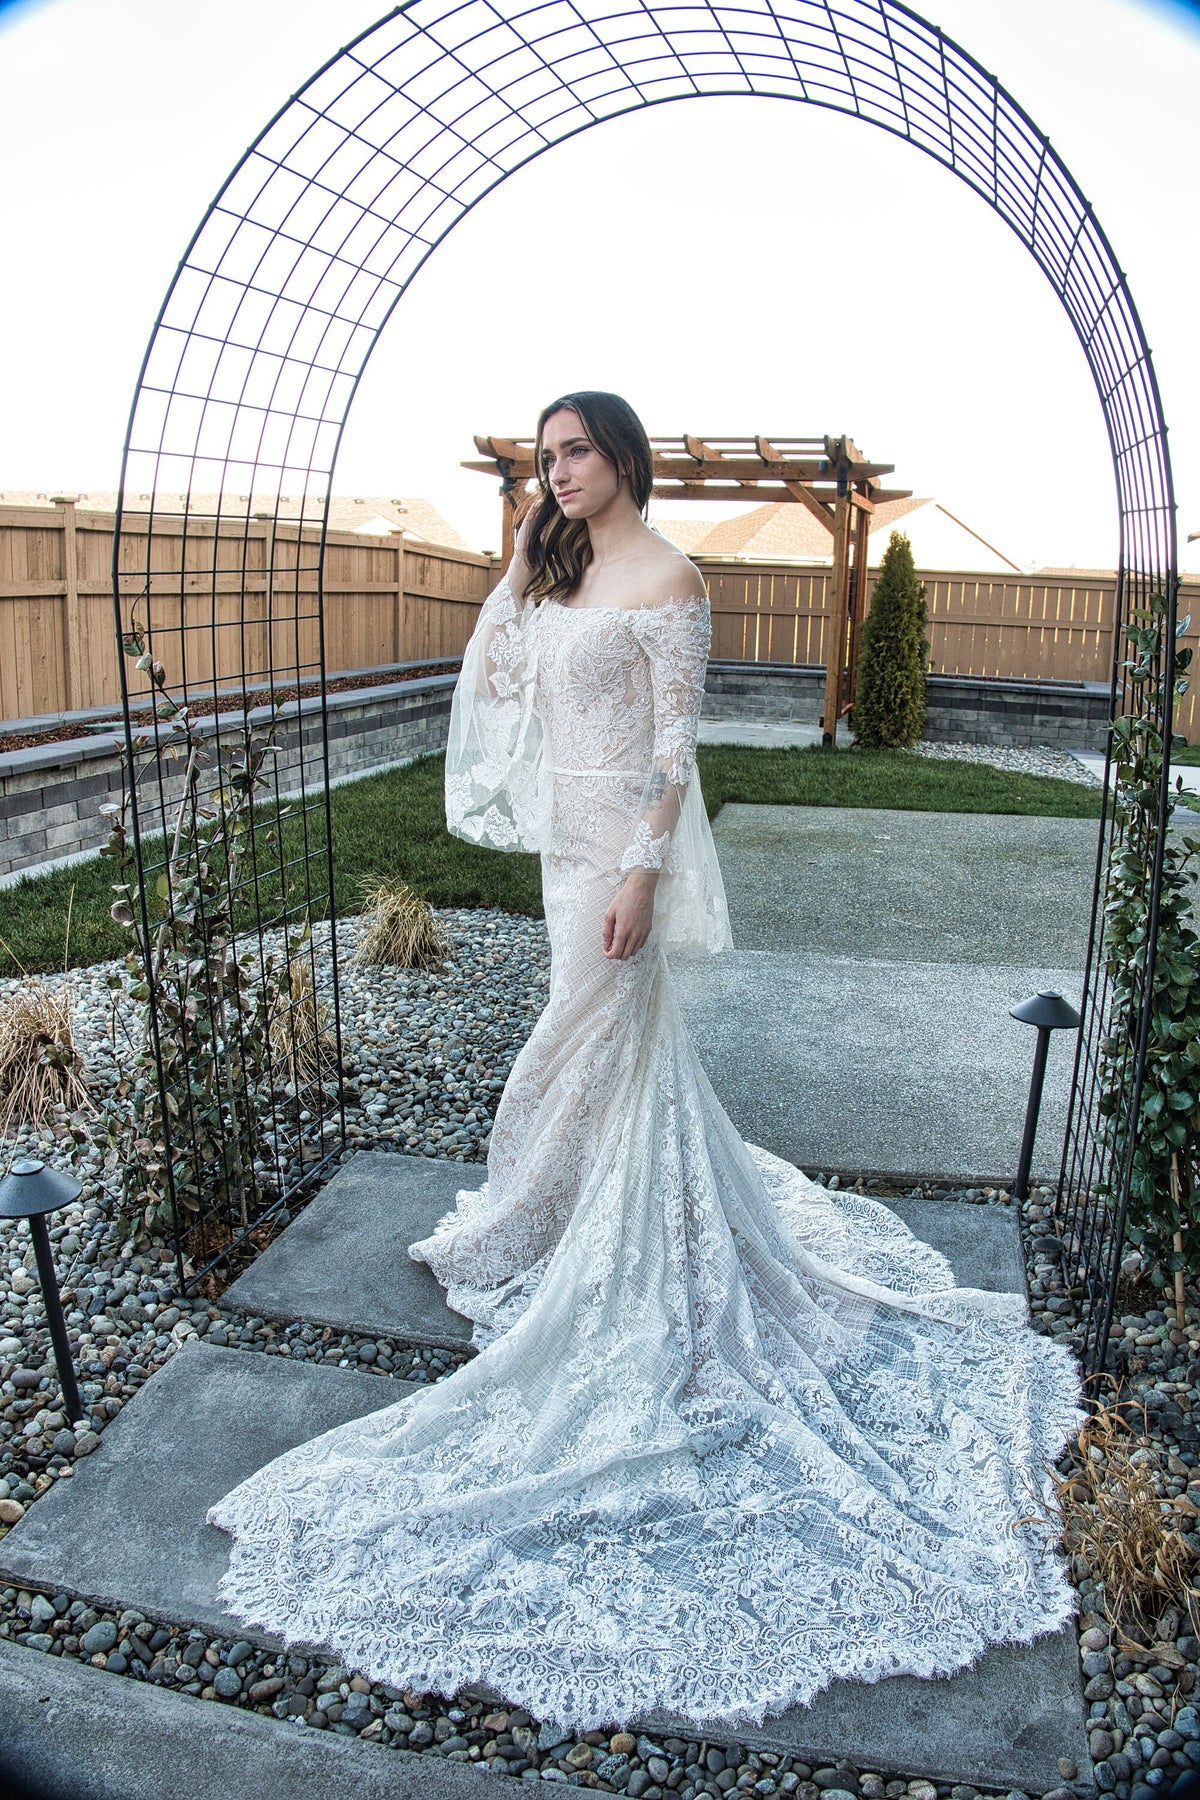 Beautiful Lace Off the Shoulder Long Sleeve Straight Neckline Sheath Fit and Flare Wedding Dress Bridal Gown All Over Lace